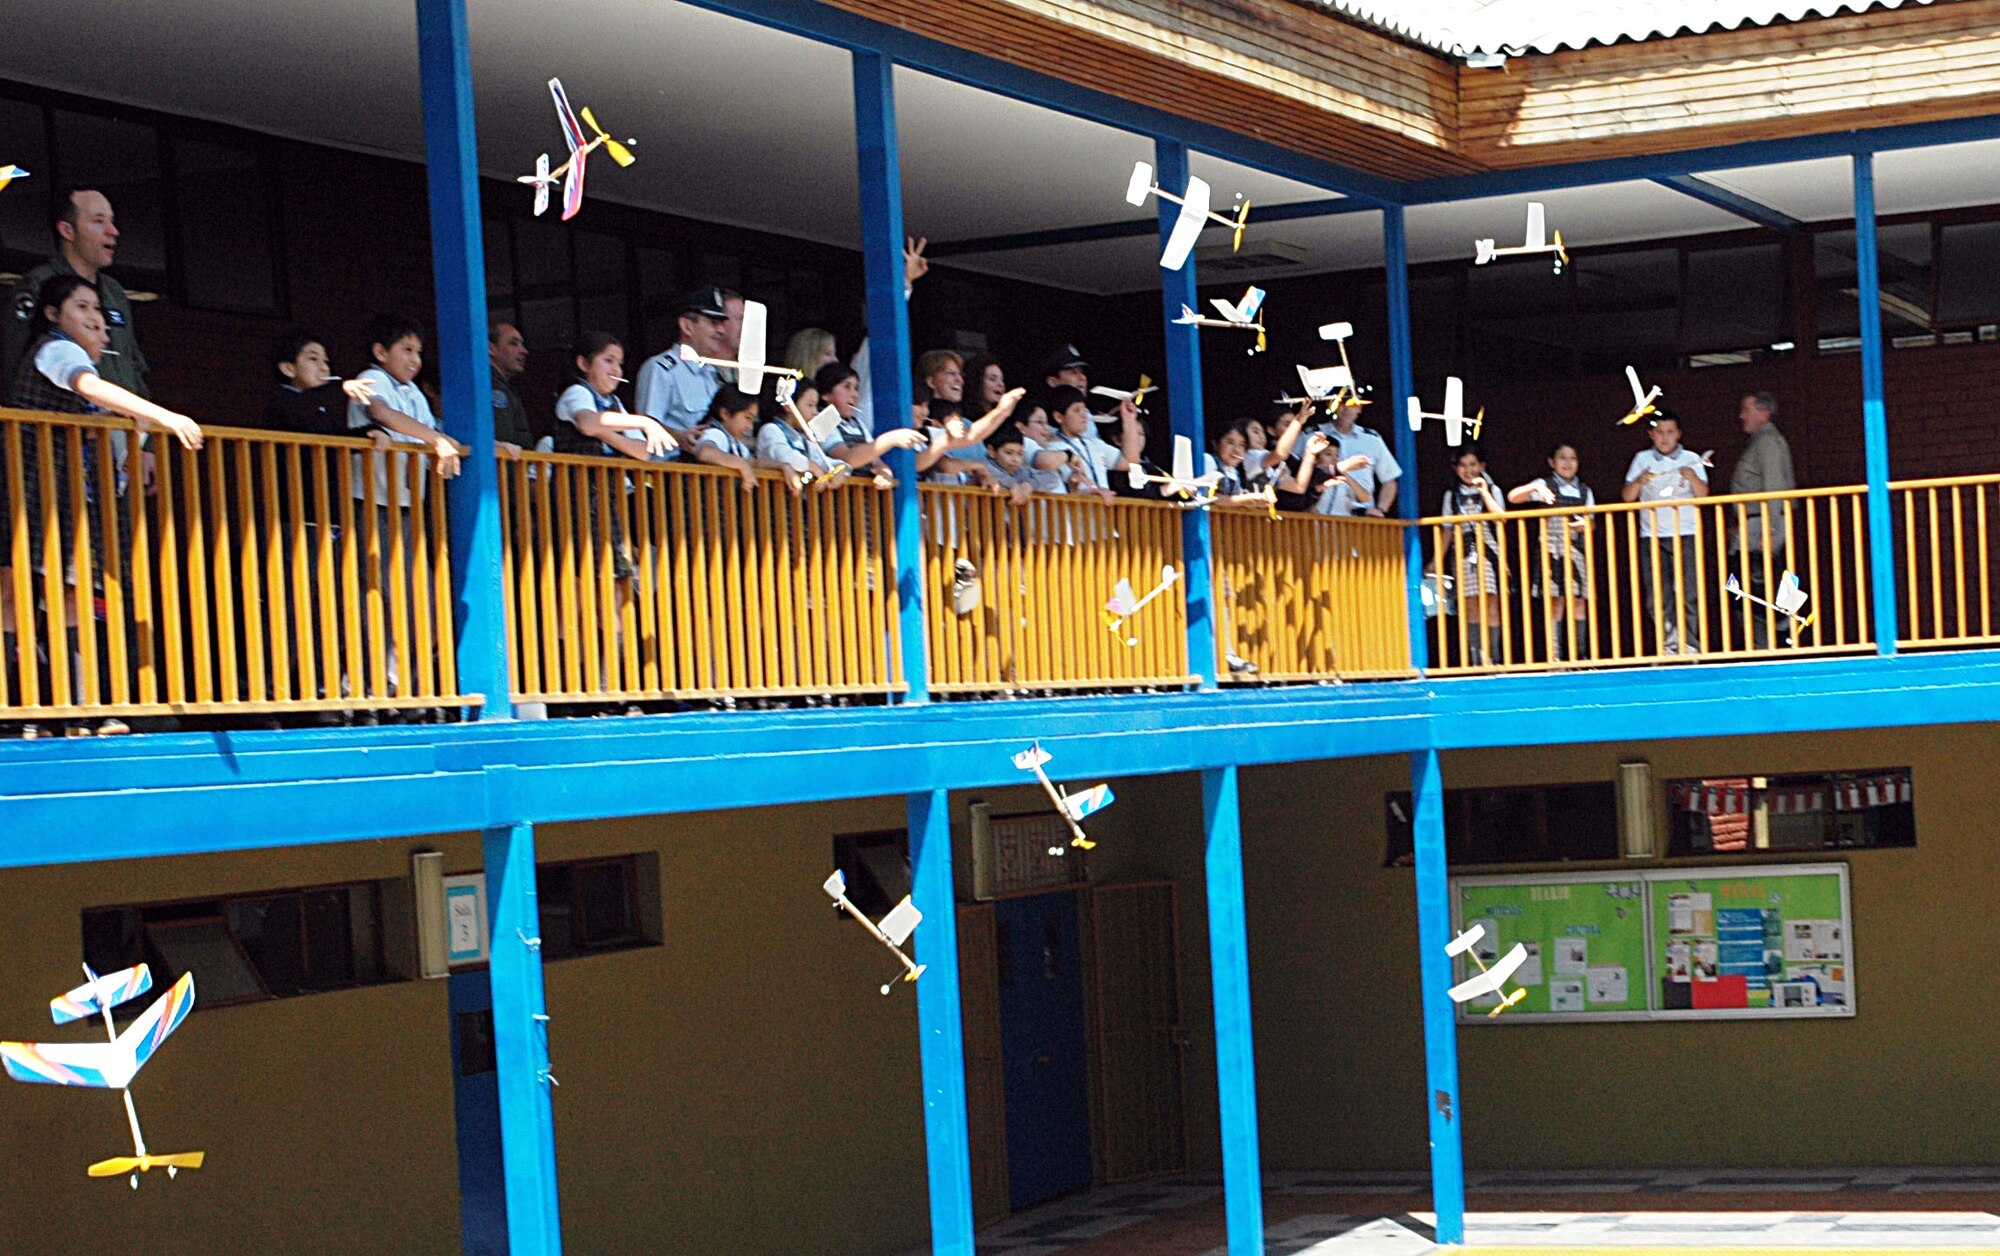 Children from the Complejo Educacional Esperanza School in Santiago, Chile launch their newly constructed model airplanes Oct. 27 following a community outreach event there to teach the children about applied sciences. The volunteer opportunity was the first of many scheduled in Latin America during Operation Southern Partner -- an Air Forces Southern-led event aimed at providing intensive, periodic subject matter exchanges with partner nations in the U.S. Southern Command area of focus.  The all-new program features more than 70 U.S. Air Force subject matter experts from about 25 career fields working alongside partner nation military members in similar career specialties during week-long exchanges. (U.S. Embassy photo/Jose Nuños)